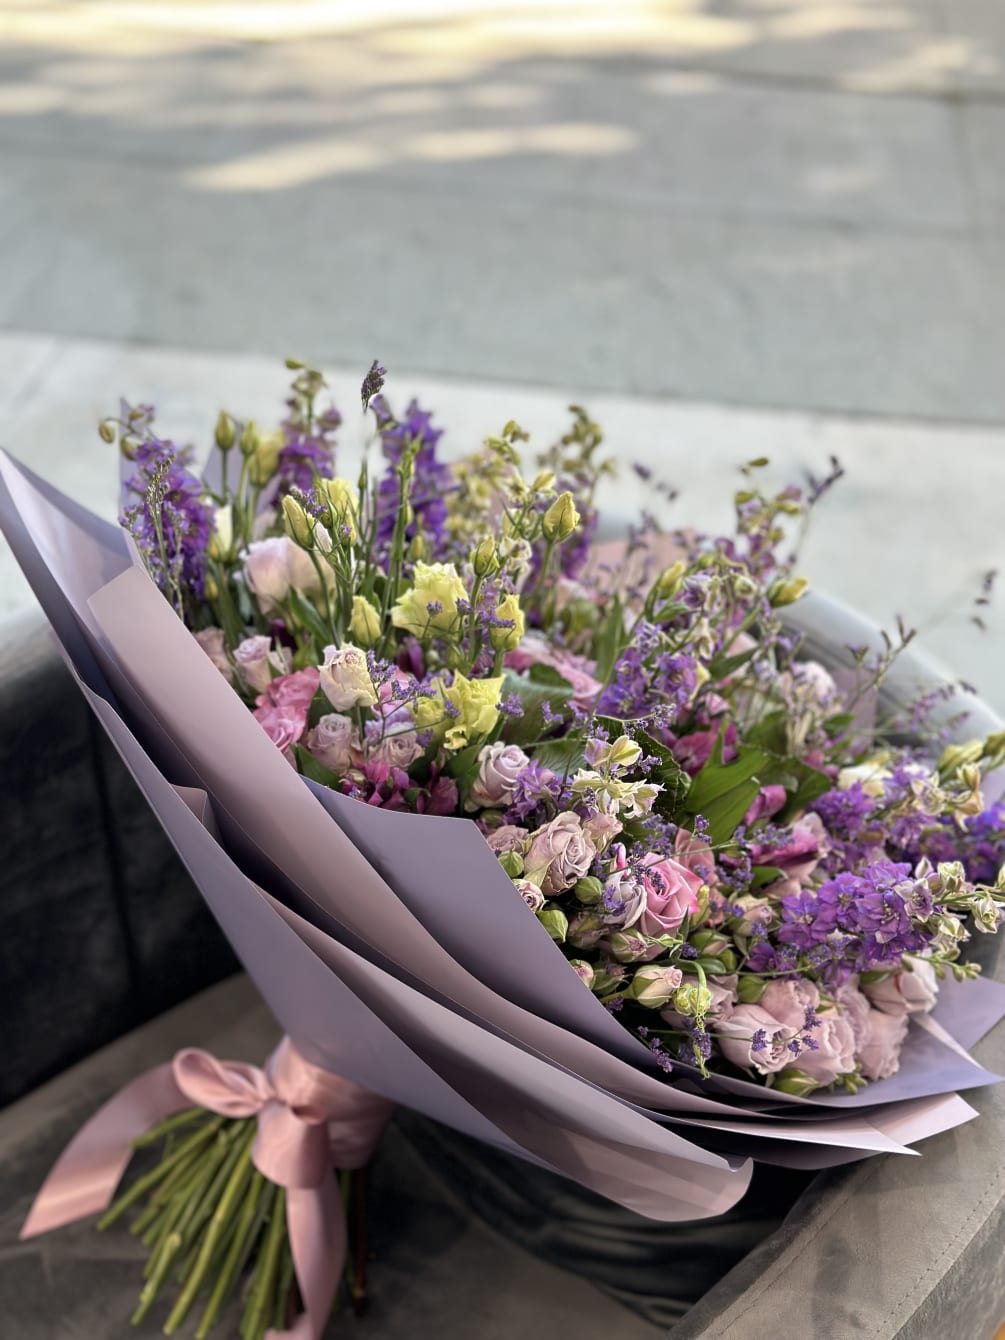 A beautiful and colorful bouquet with a variety of premium purple flowers